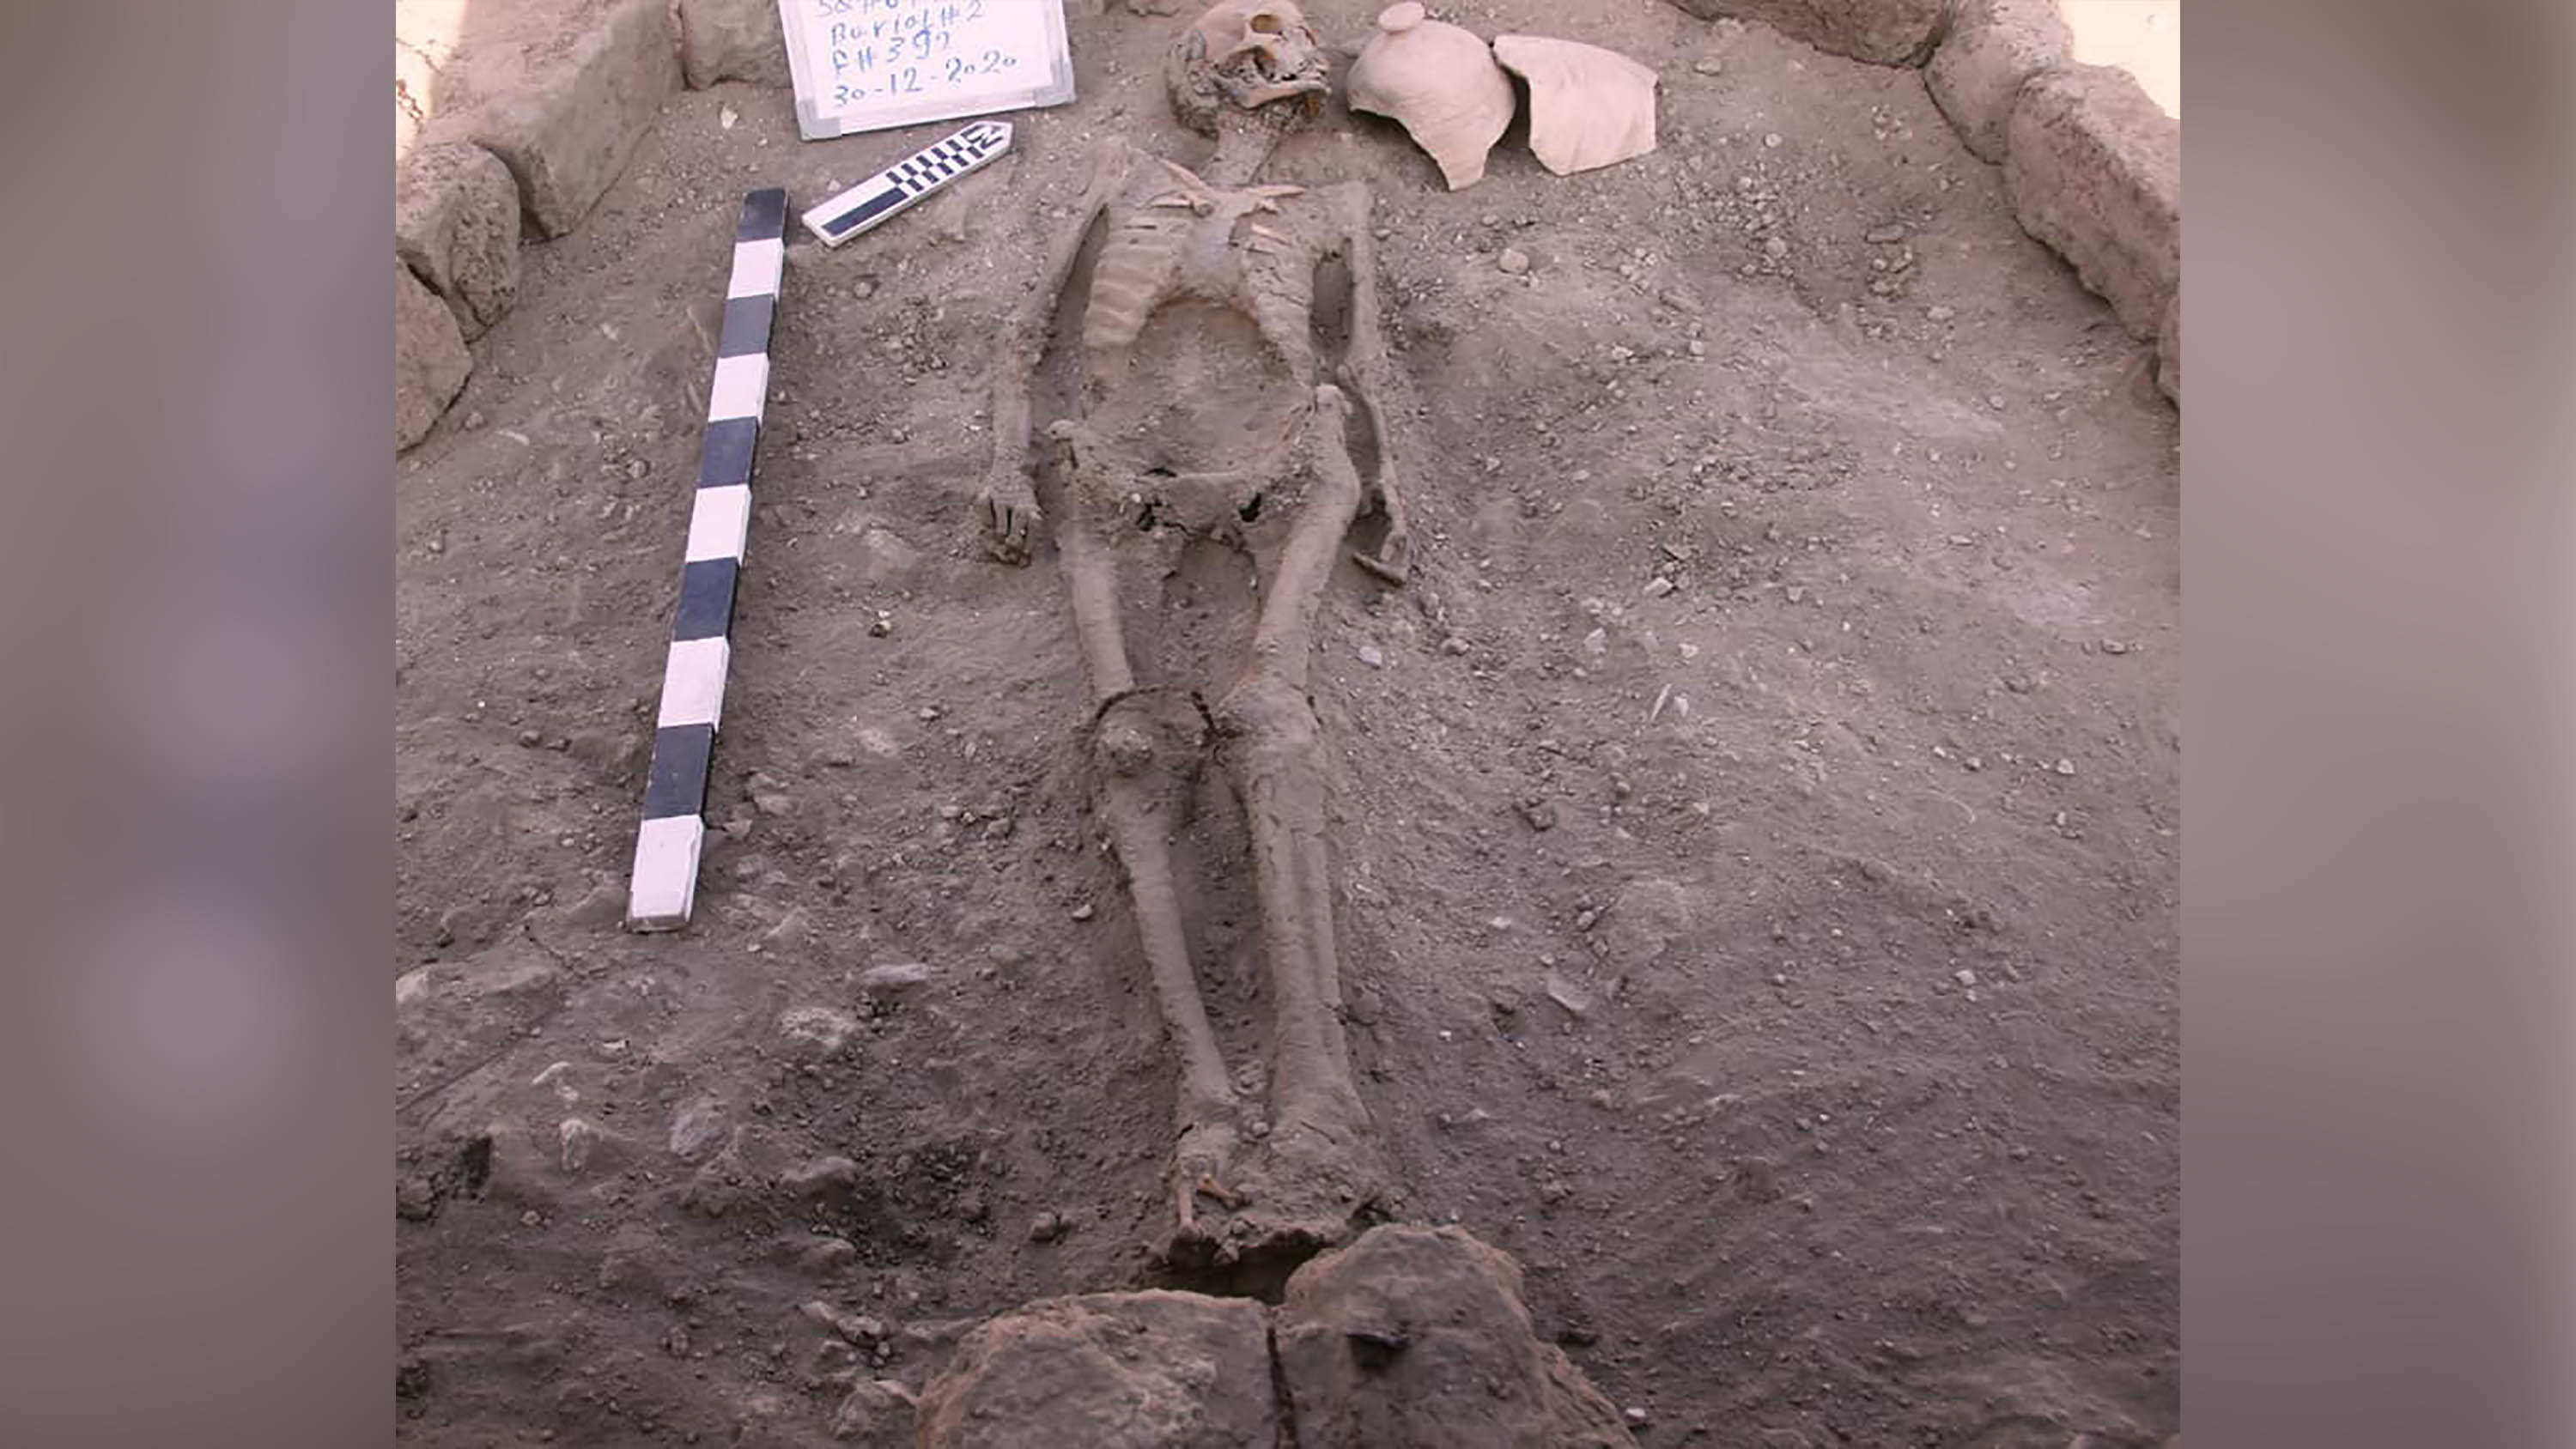 Skeletons were also found buried in the city.